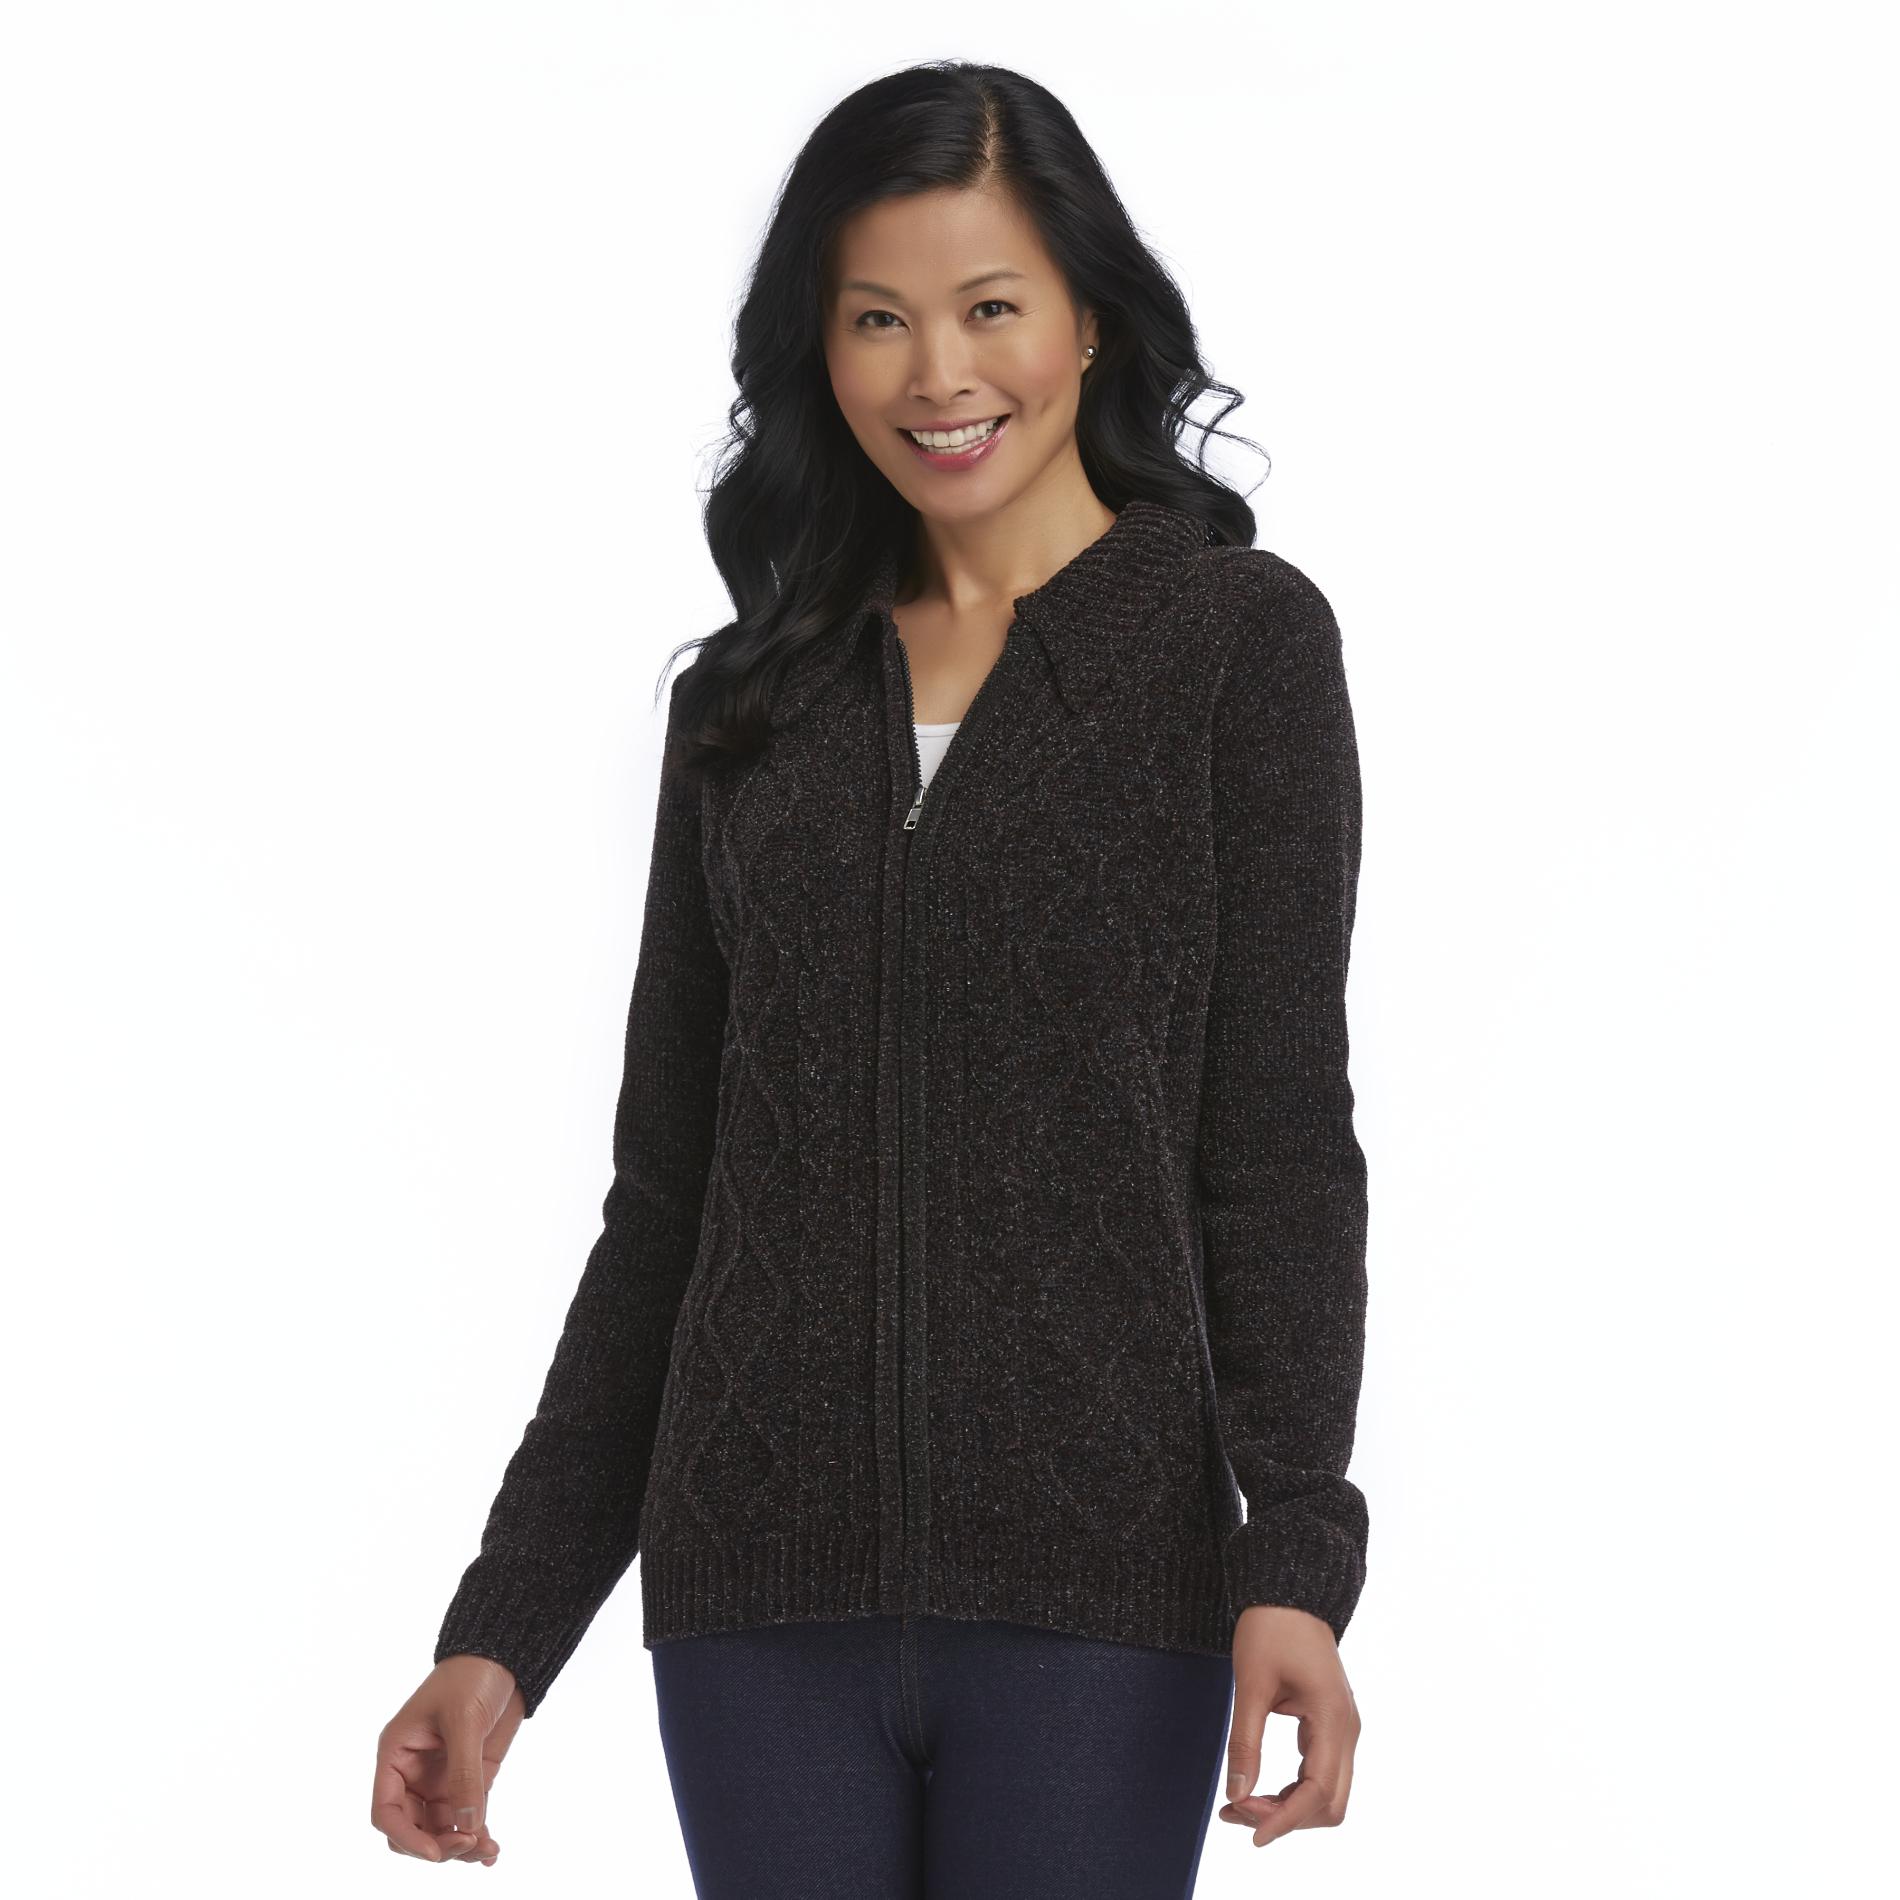 Basic Editions Women's Zip-Front Chenille Sweater